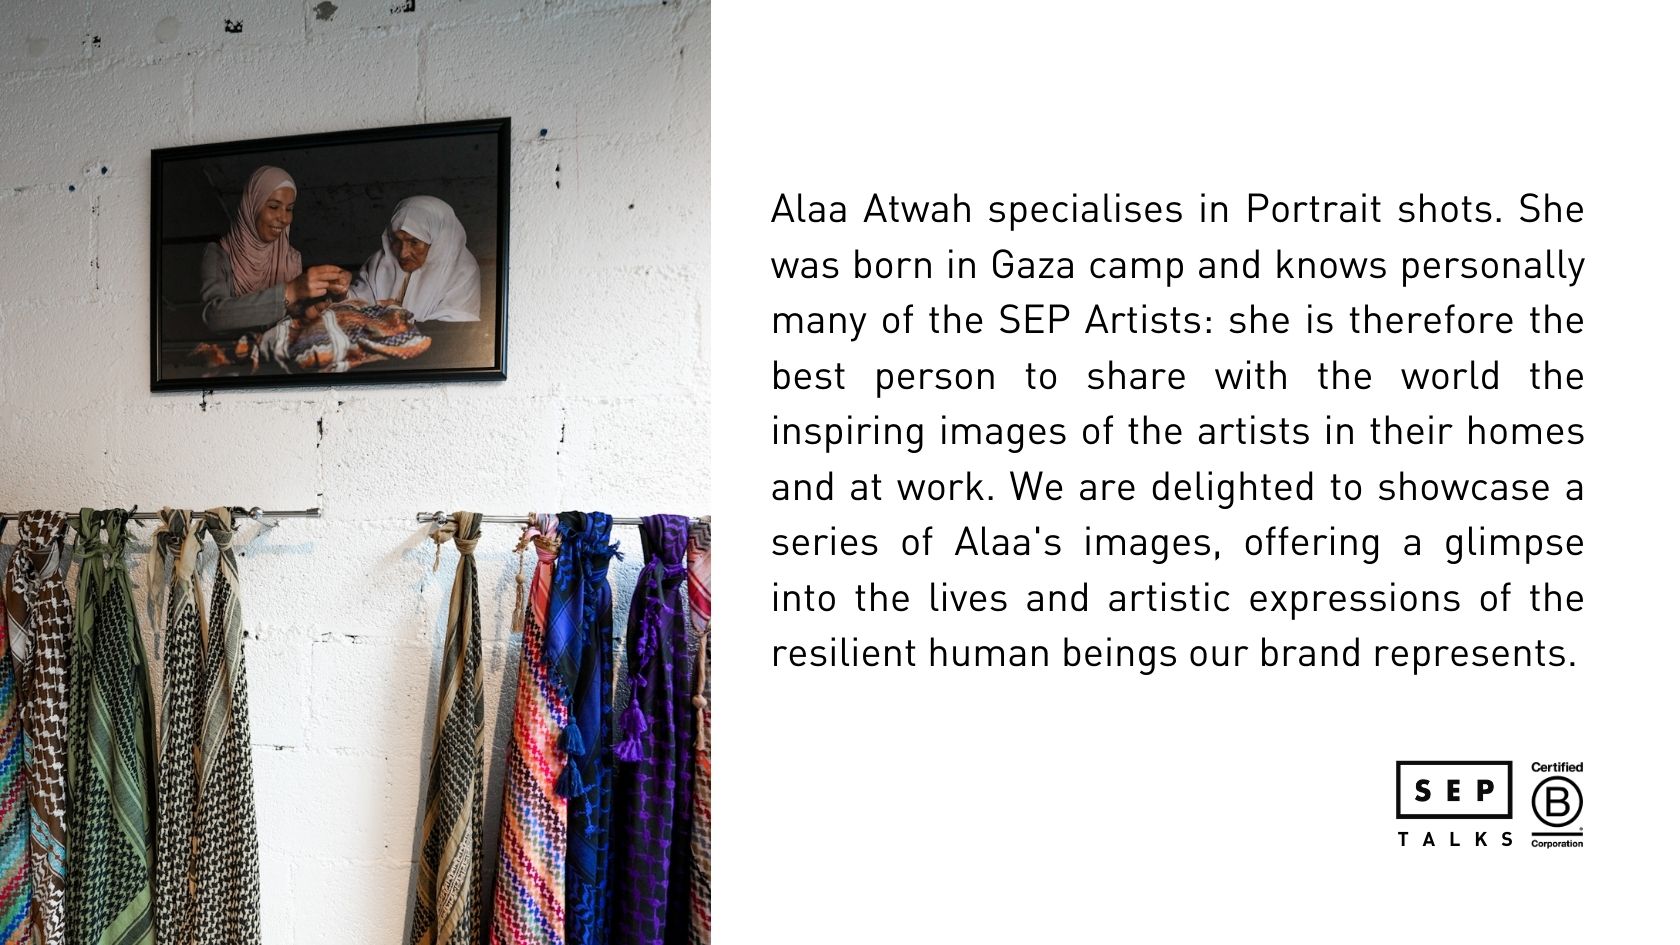 Alaa Atwah specialises in Portrait shots. She was born in Gaza camp and knows personally many of the SEP Artists: she is therefore the best person to share with the world the inspiring images of the artists in their homes and at work. We are delighted to showcase a series of Alaa's images, offering a glimpse into the lives and artistic expressions of the resilient human beings our brand represents.